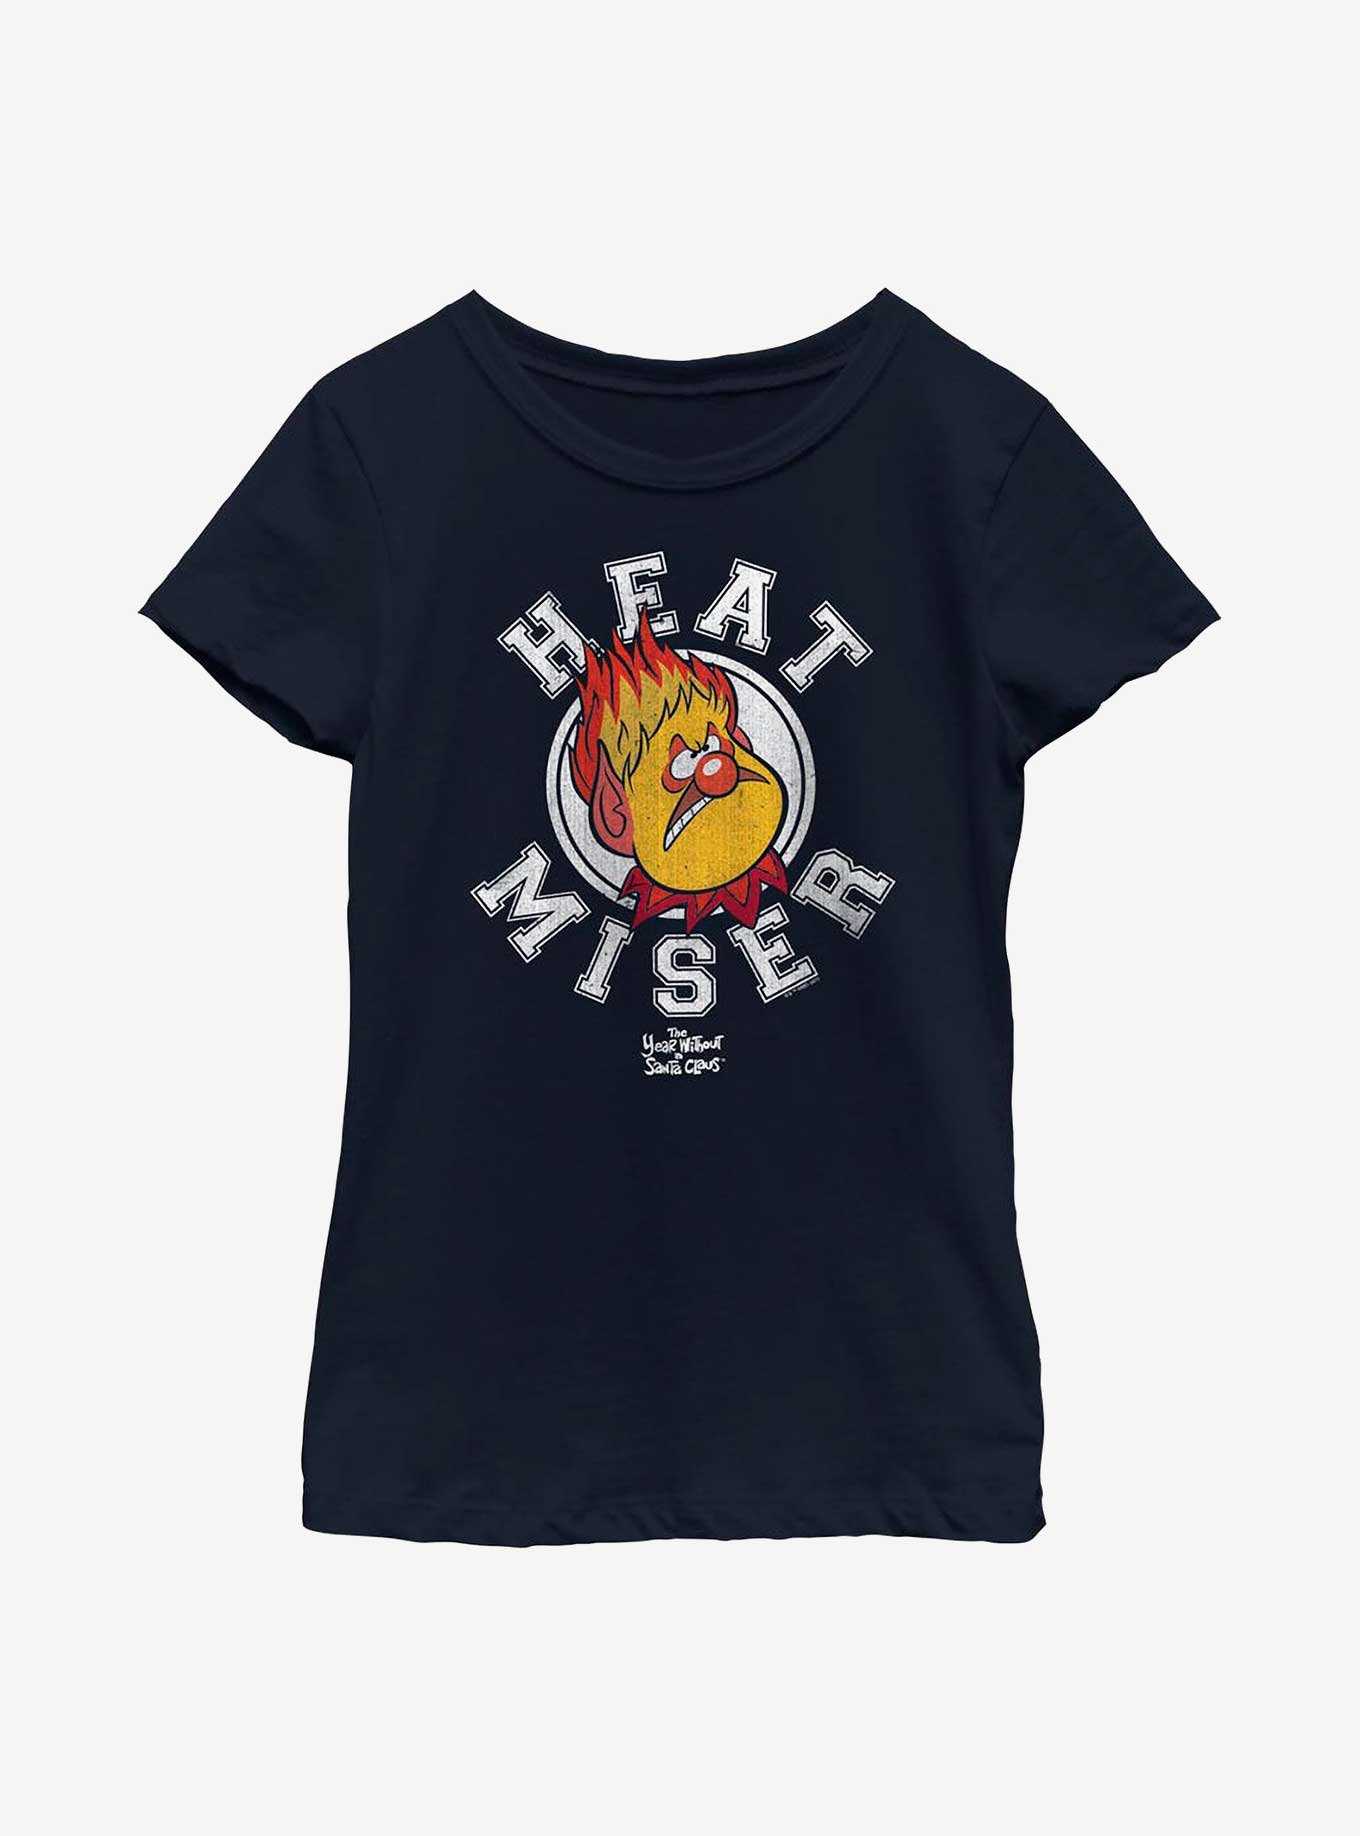 The Year Without Santa Claus Heat Miser Collegiate Youth Girls T-Shirt, , hi-res